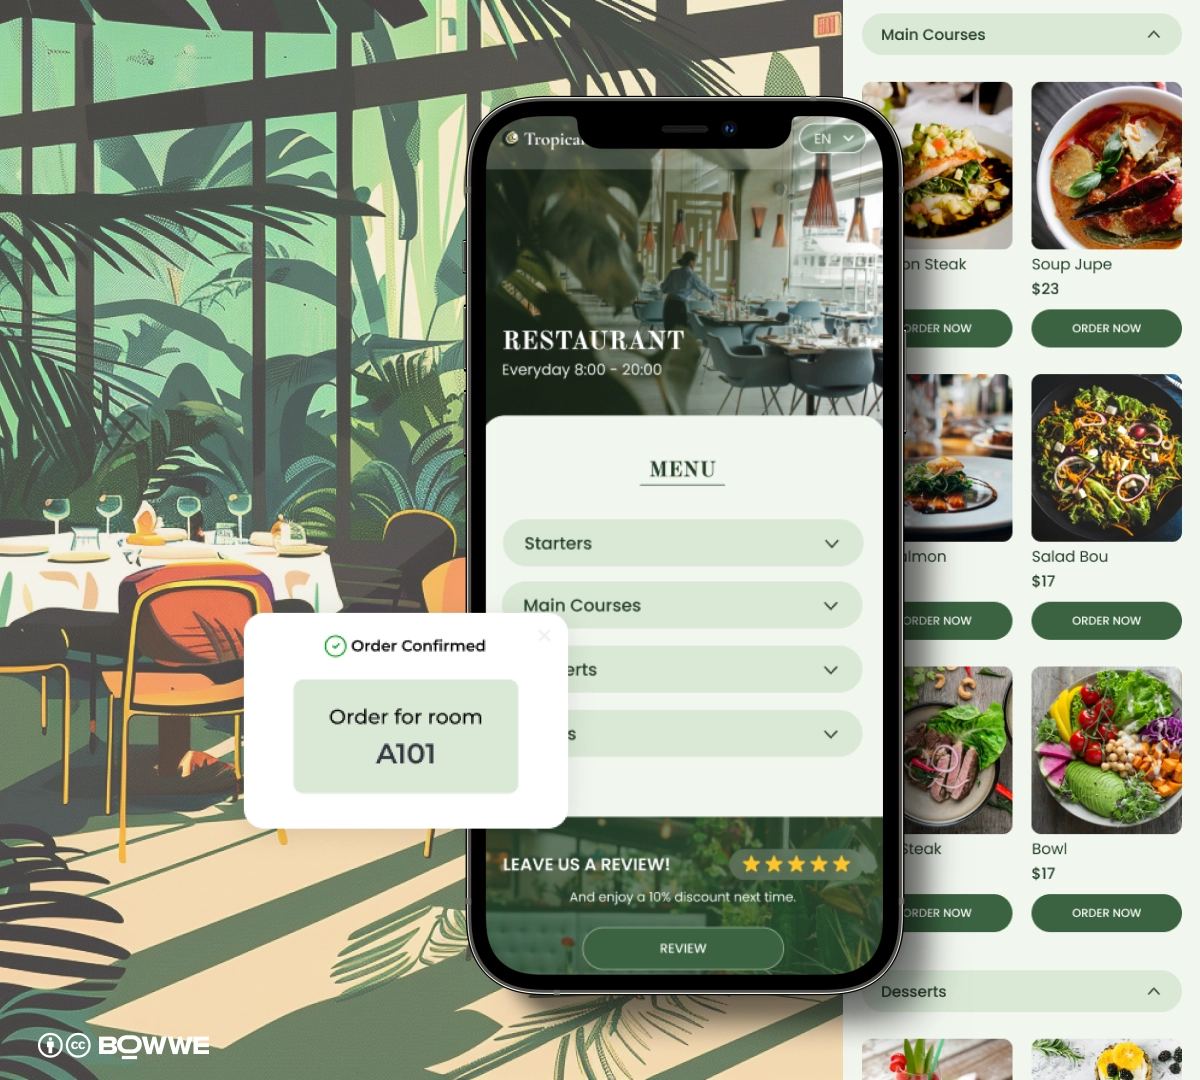 Mobile phone with hotel restaurant menu in BOWWE Micro App open and list of restaurant menu items next to it